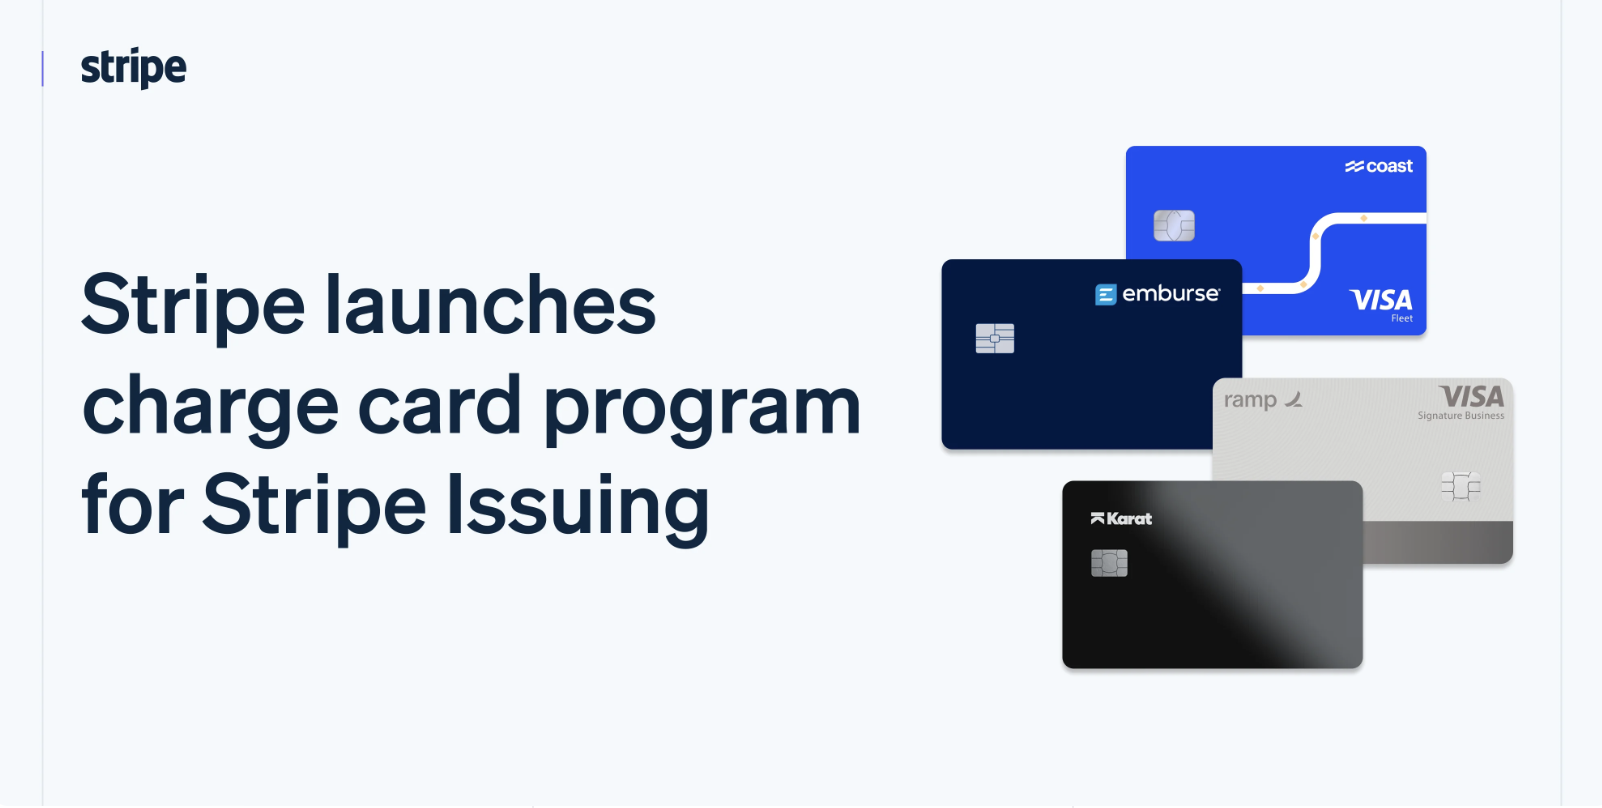 Stripe Issuing charge cards